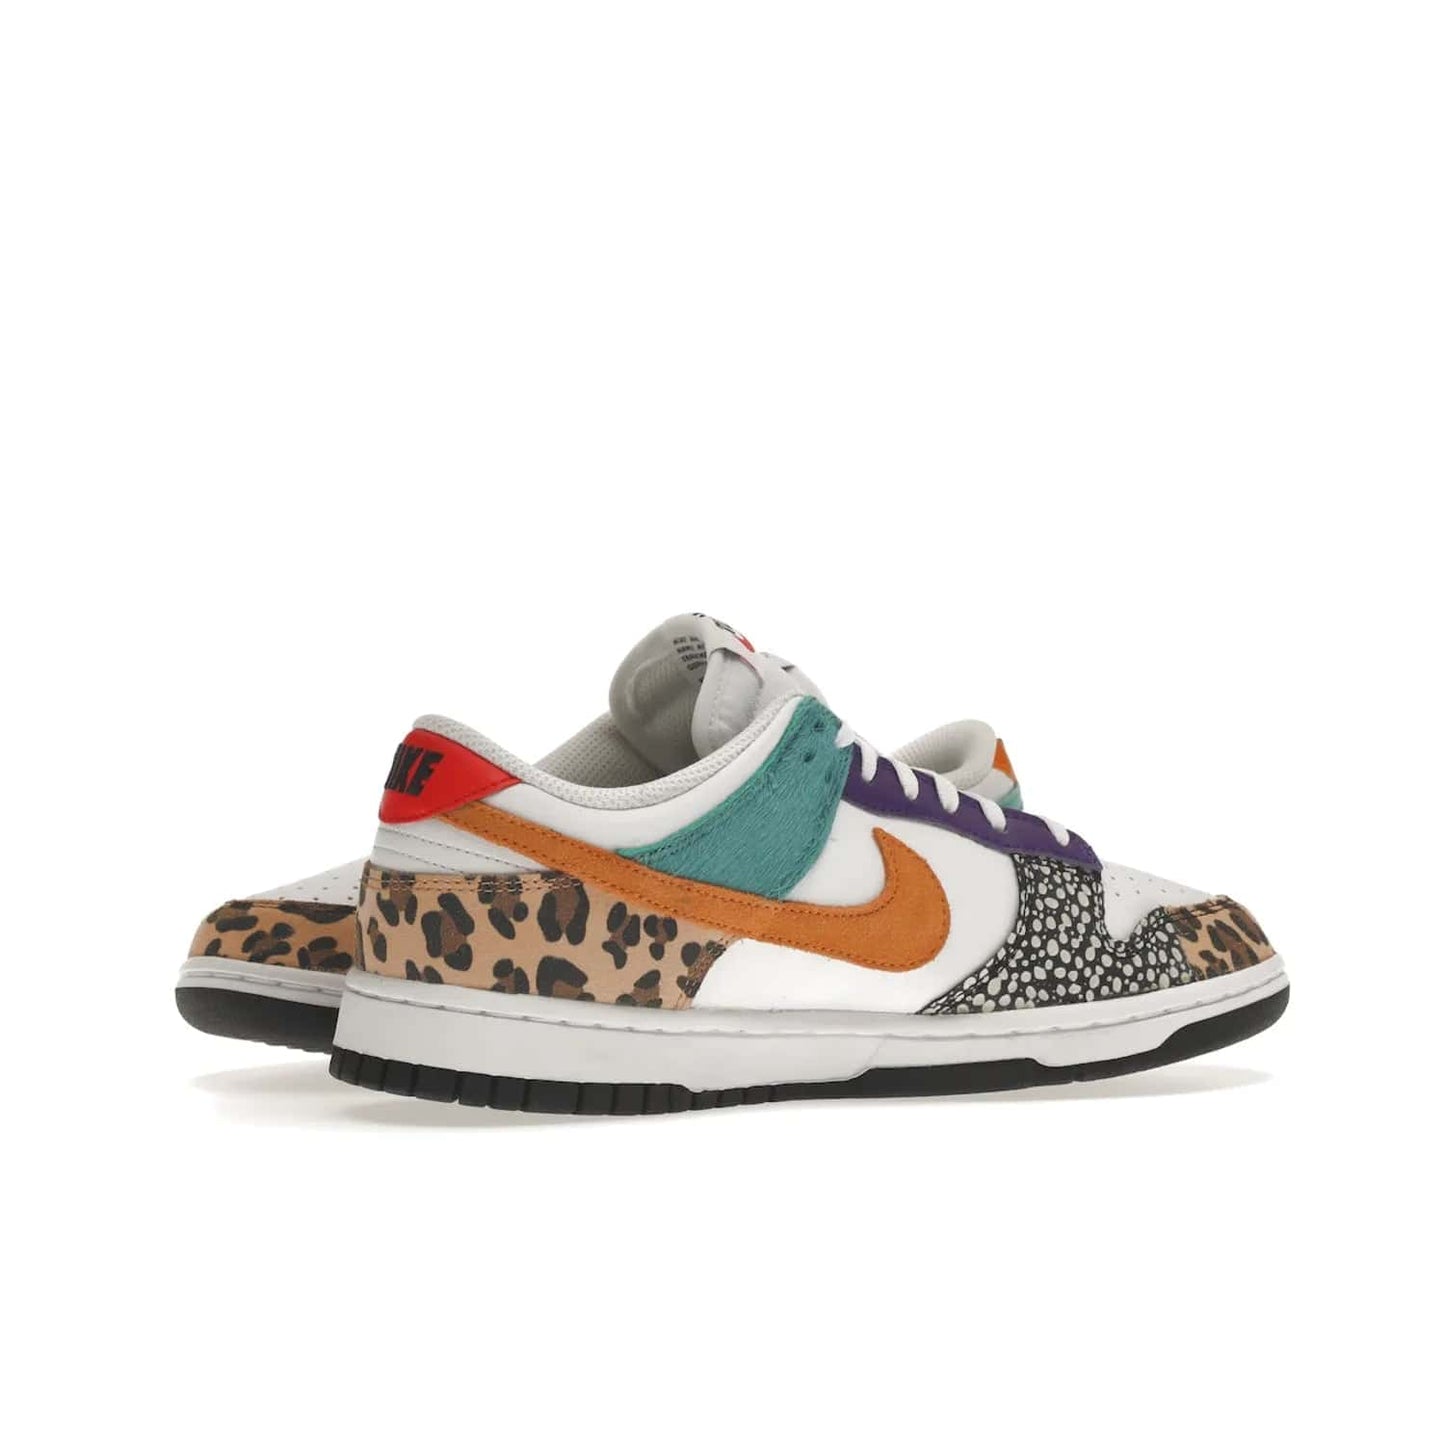 Nike Dunk Low Safari Mix (Women's) - Image 16 - Only at www.BallersClubKickz.com - Express your unique style with the Women’s Nike Dunk Low Safari Mix. Featuring a vibrant mix of white leather, leopard Durabuck, faux-horsehair, suede, and more, this stylish sneaker will turn heads. Shop now for a bold look at an affordable $120 price tag. Available in May 2022.